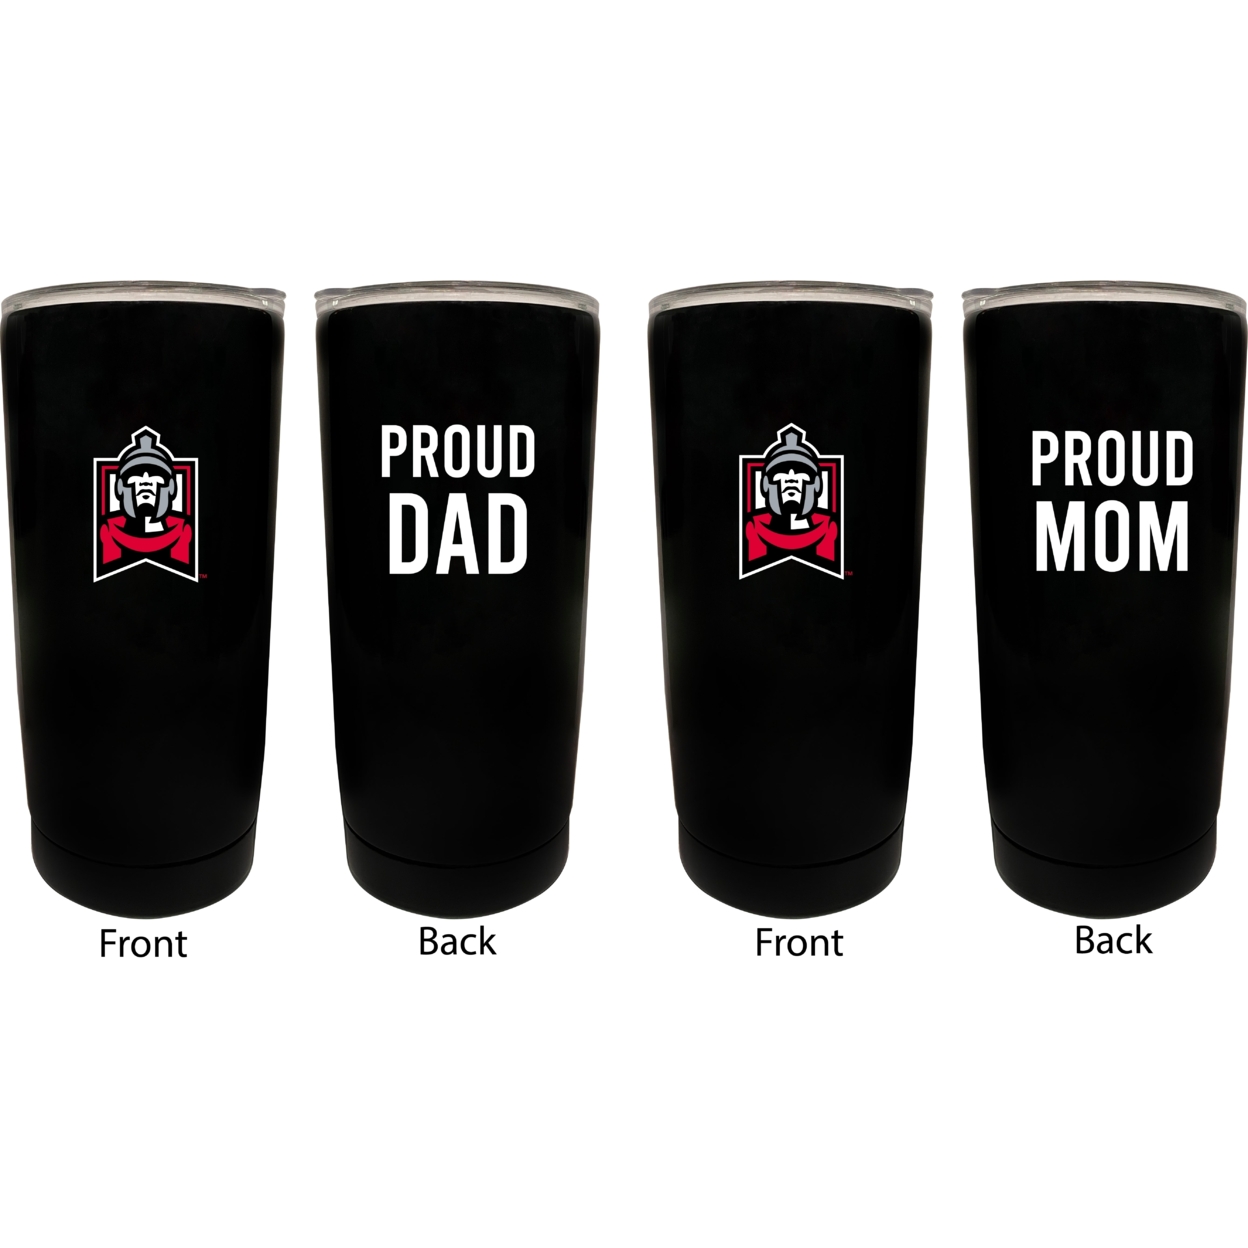 East Stroudsburg University Proud Mom And Dad 16 Oz Insulated Stainless Steel Tumblers 2 Pack Black.